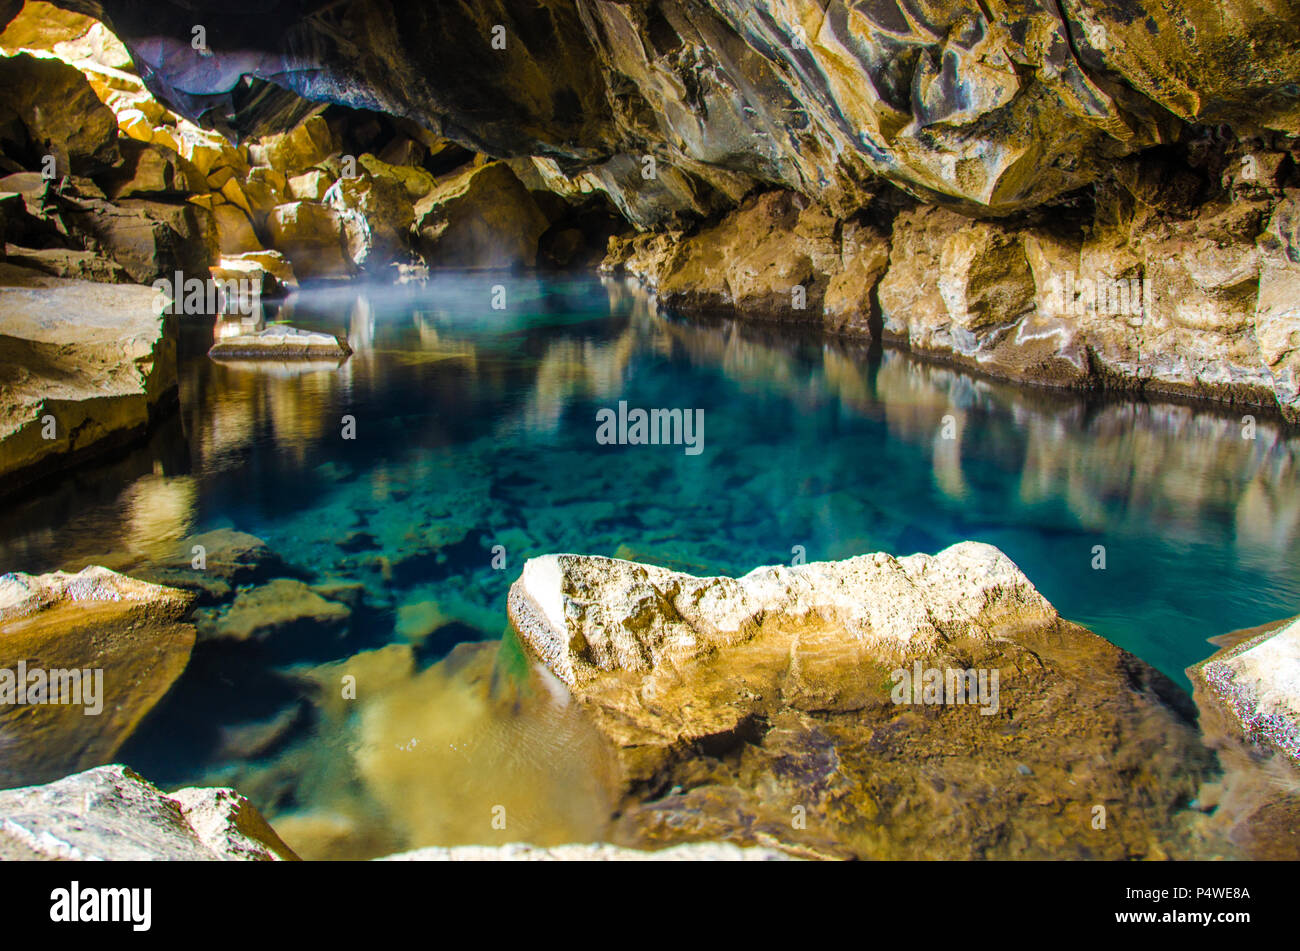 Iceland - Myvatn - Hot pool in cave Stock Photo